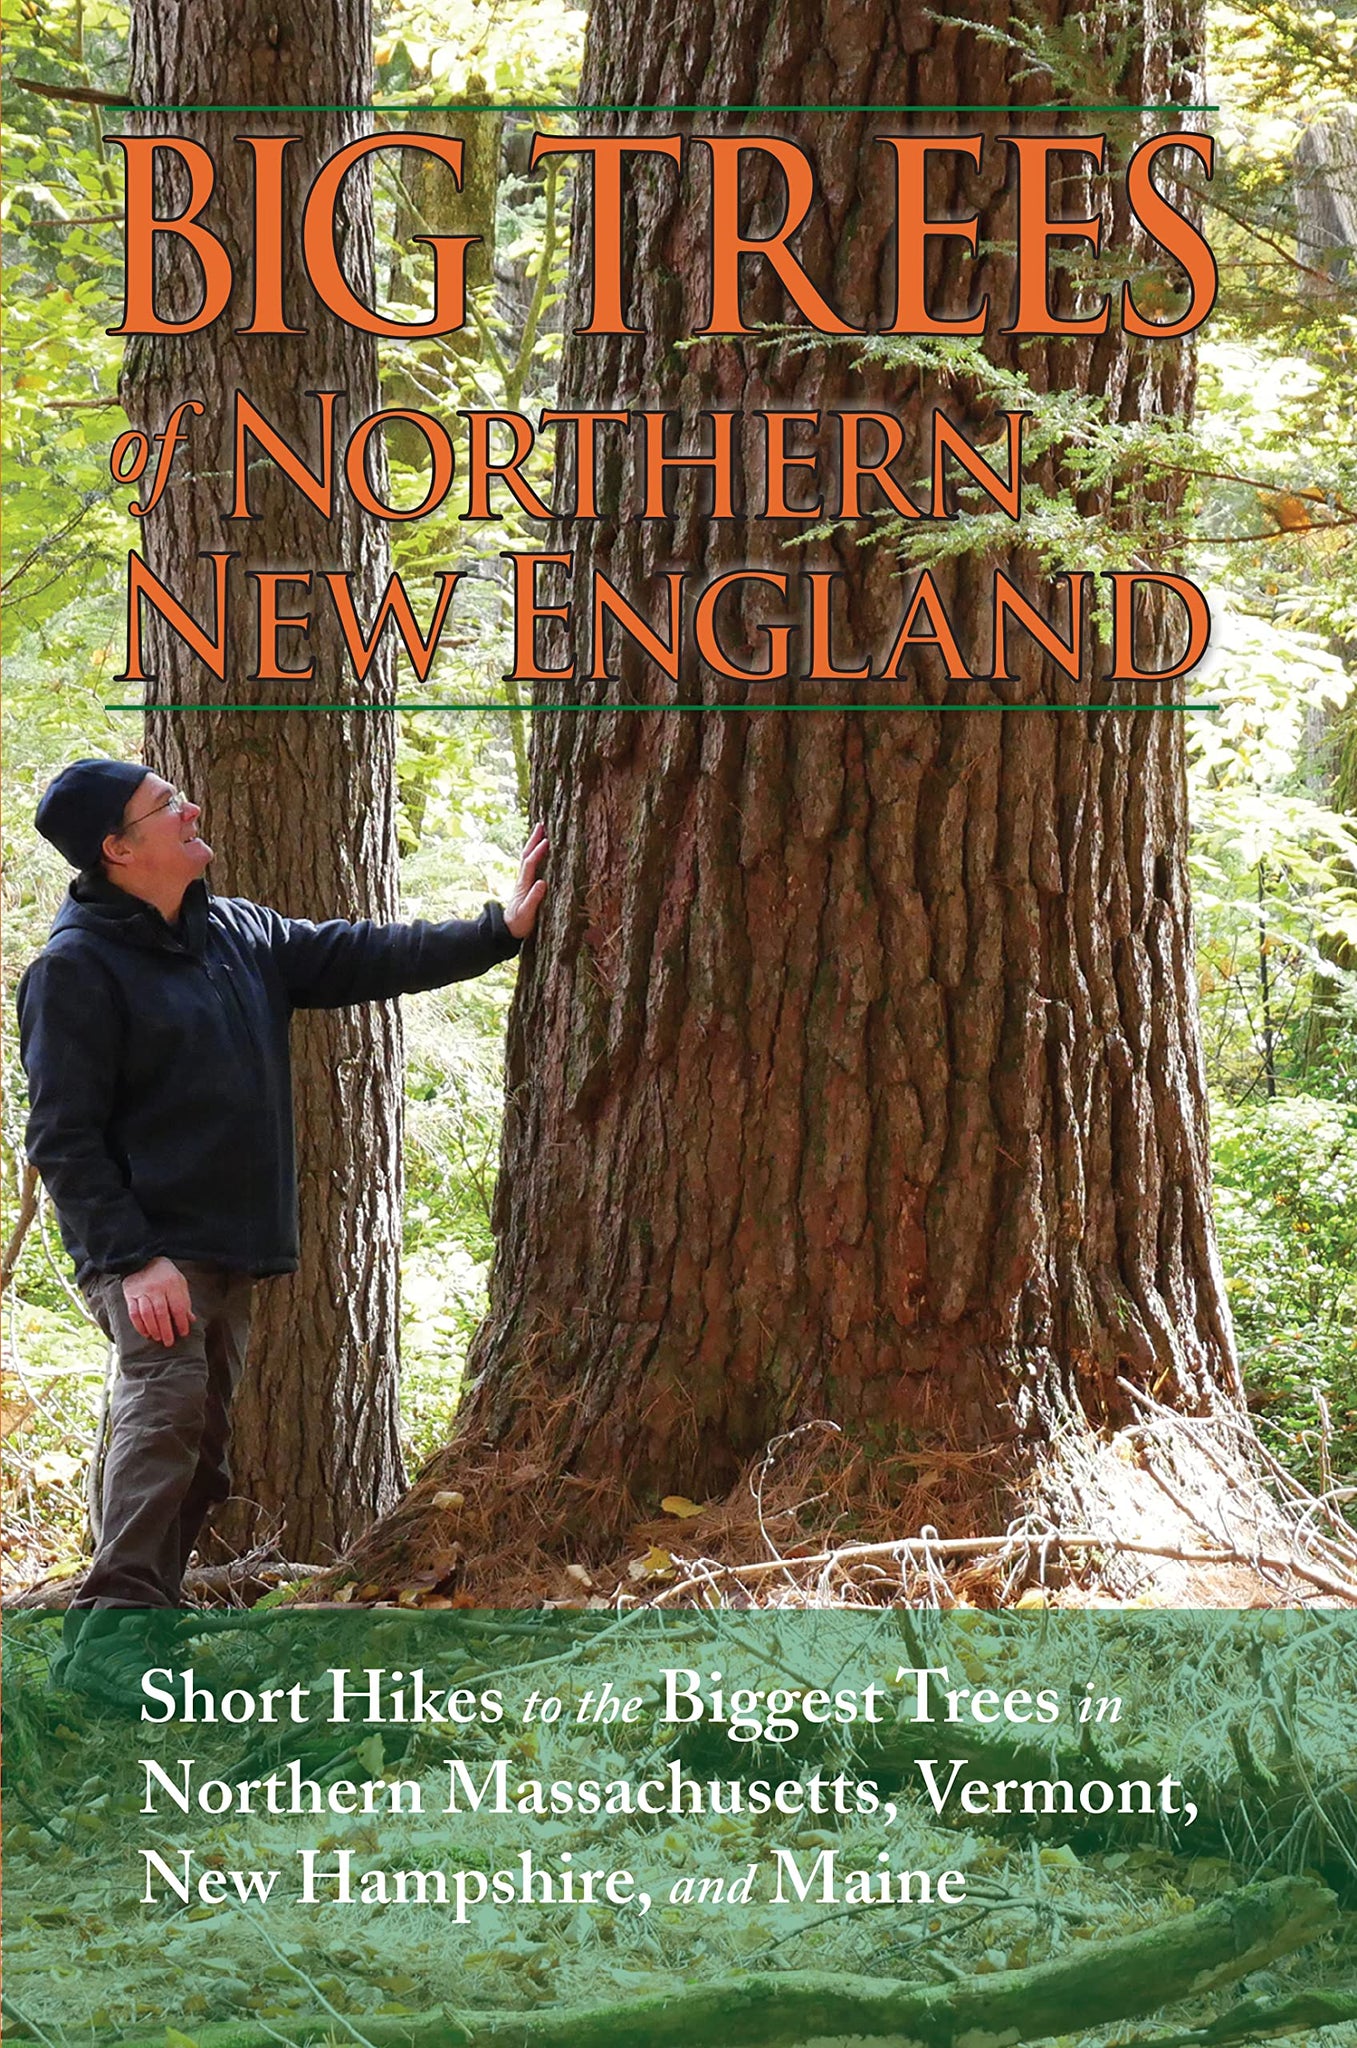 Big Trees of Northern New England: Short Hikes to the Biggest Trees in Northern MA, VT, NH, & Maine by Kevin Martin